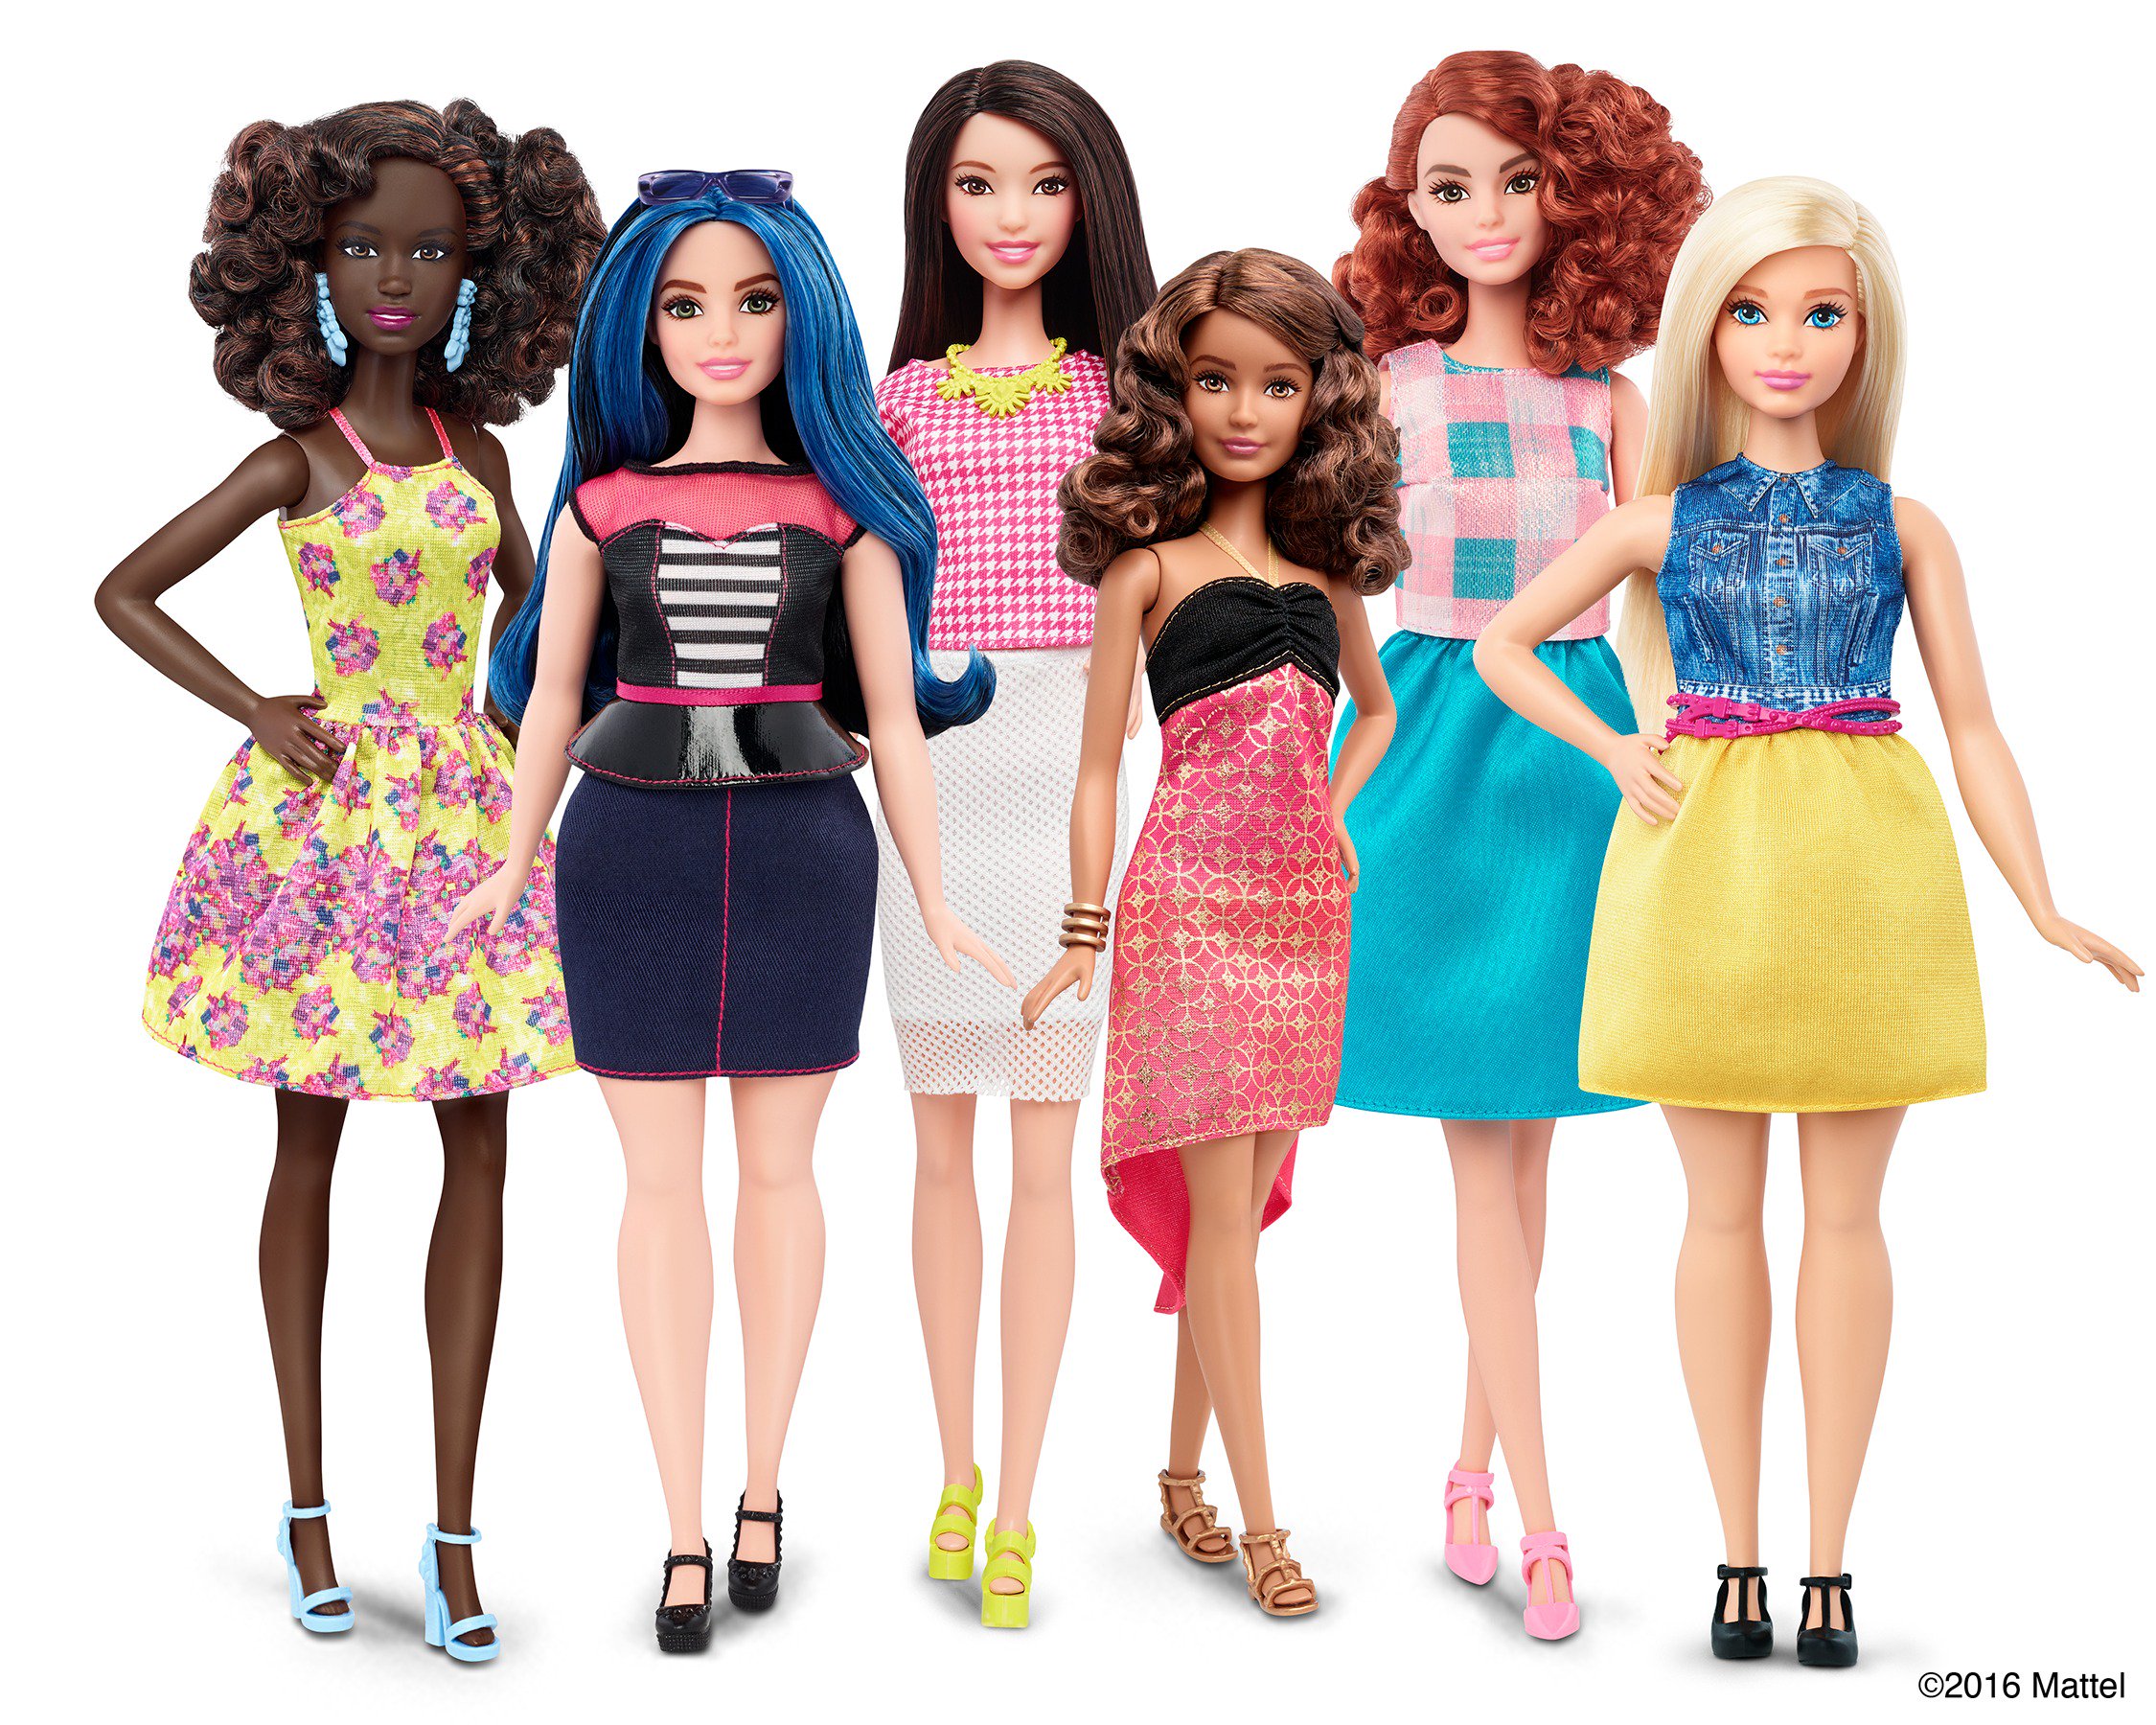 dateret hulkende overvældende Barbie on X: "We proudly add three new body types to our line. Meet the new  dolls. https://t.co/JDeqzI59nX #TheDollEvolves https://t.co/IJVcVhfPkL" / X